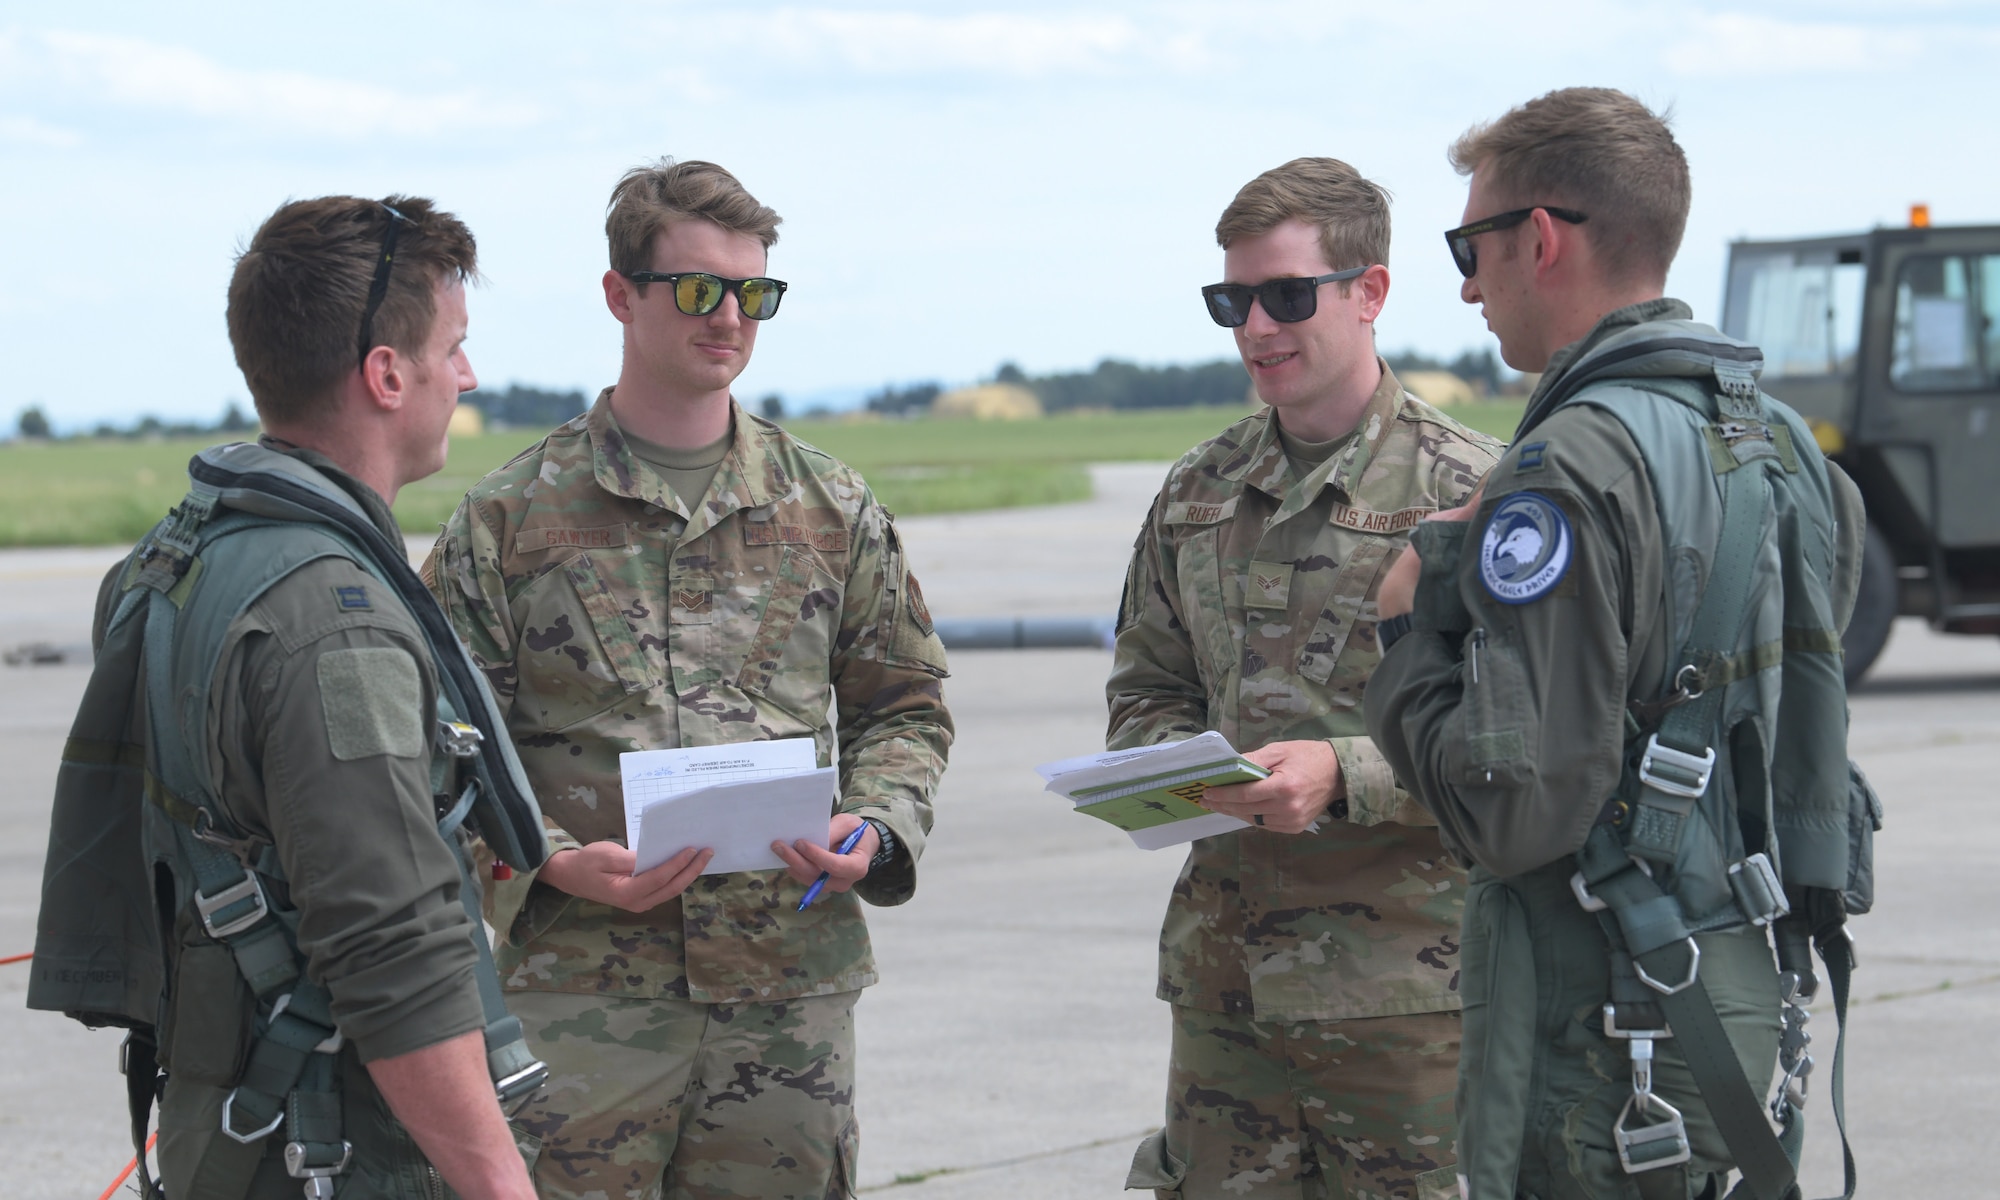 U.S. Air Force Senior Airmen Robert Sawyer (second from left) and Aaron Ruffo (third from left), 493rd Fighter Squadron intel analysts, debrief to pilots assigned to the 493rd Fighter Squadron during exercise Astral Knight 21 at Larissa Air Base, Greece, May 20, 2021. Astral Knight is a multinational, integrated air and missile defense exercise conducted in the Adriatic Region of Europe designed to enhance interoperability between the U.S. and its NATO allies in the region. (U.S. Air Force photo by Tech. Sgt. Alex Fox Echols III)